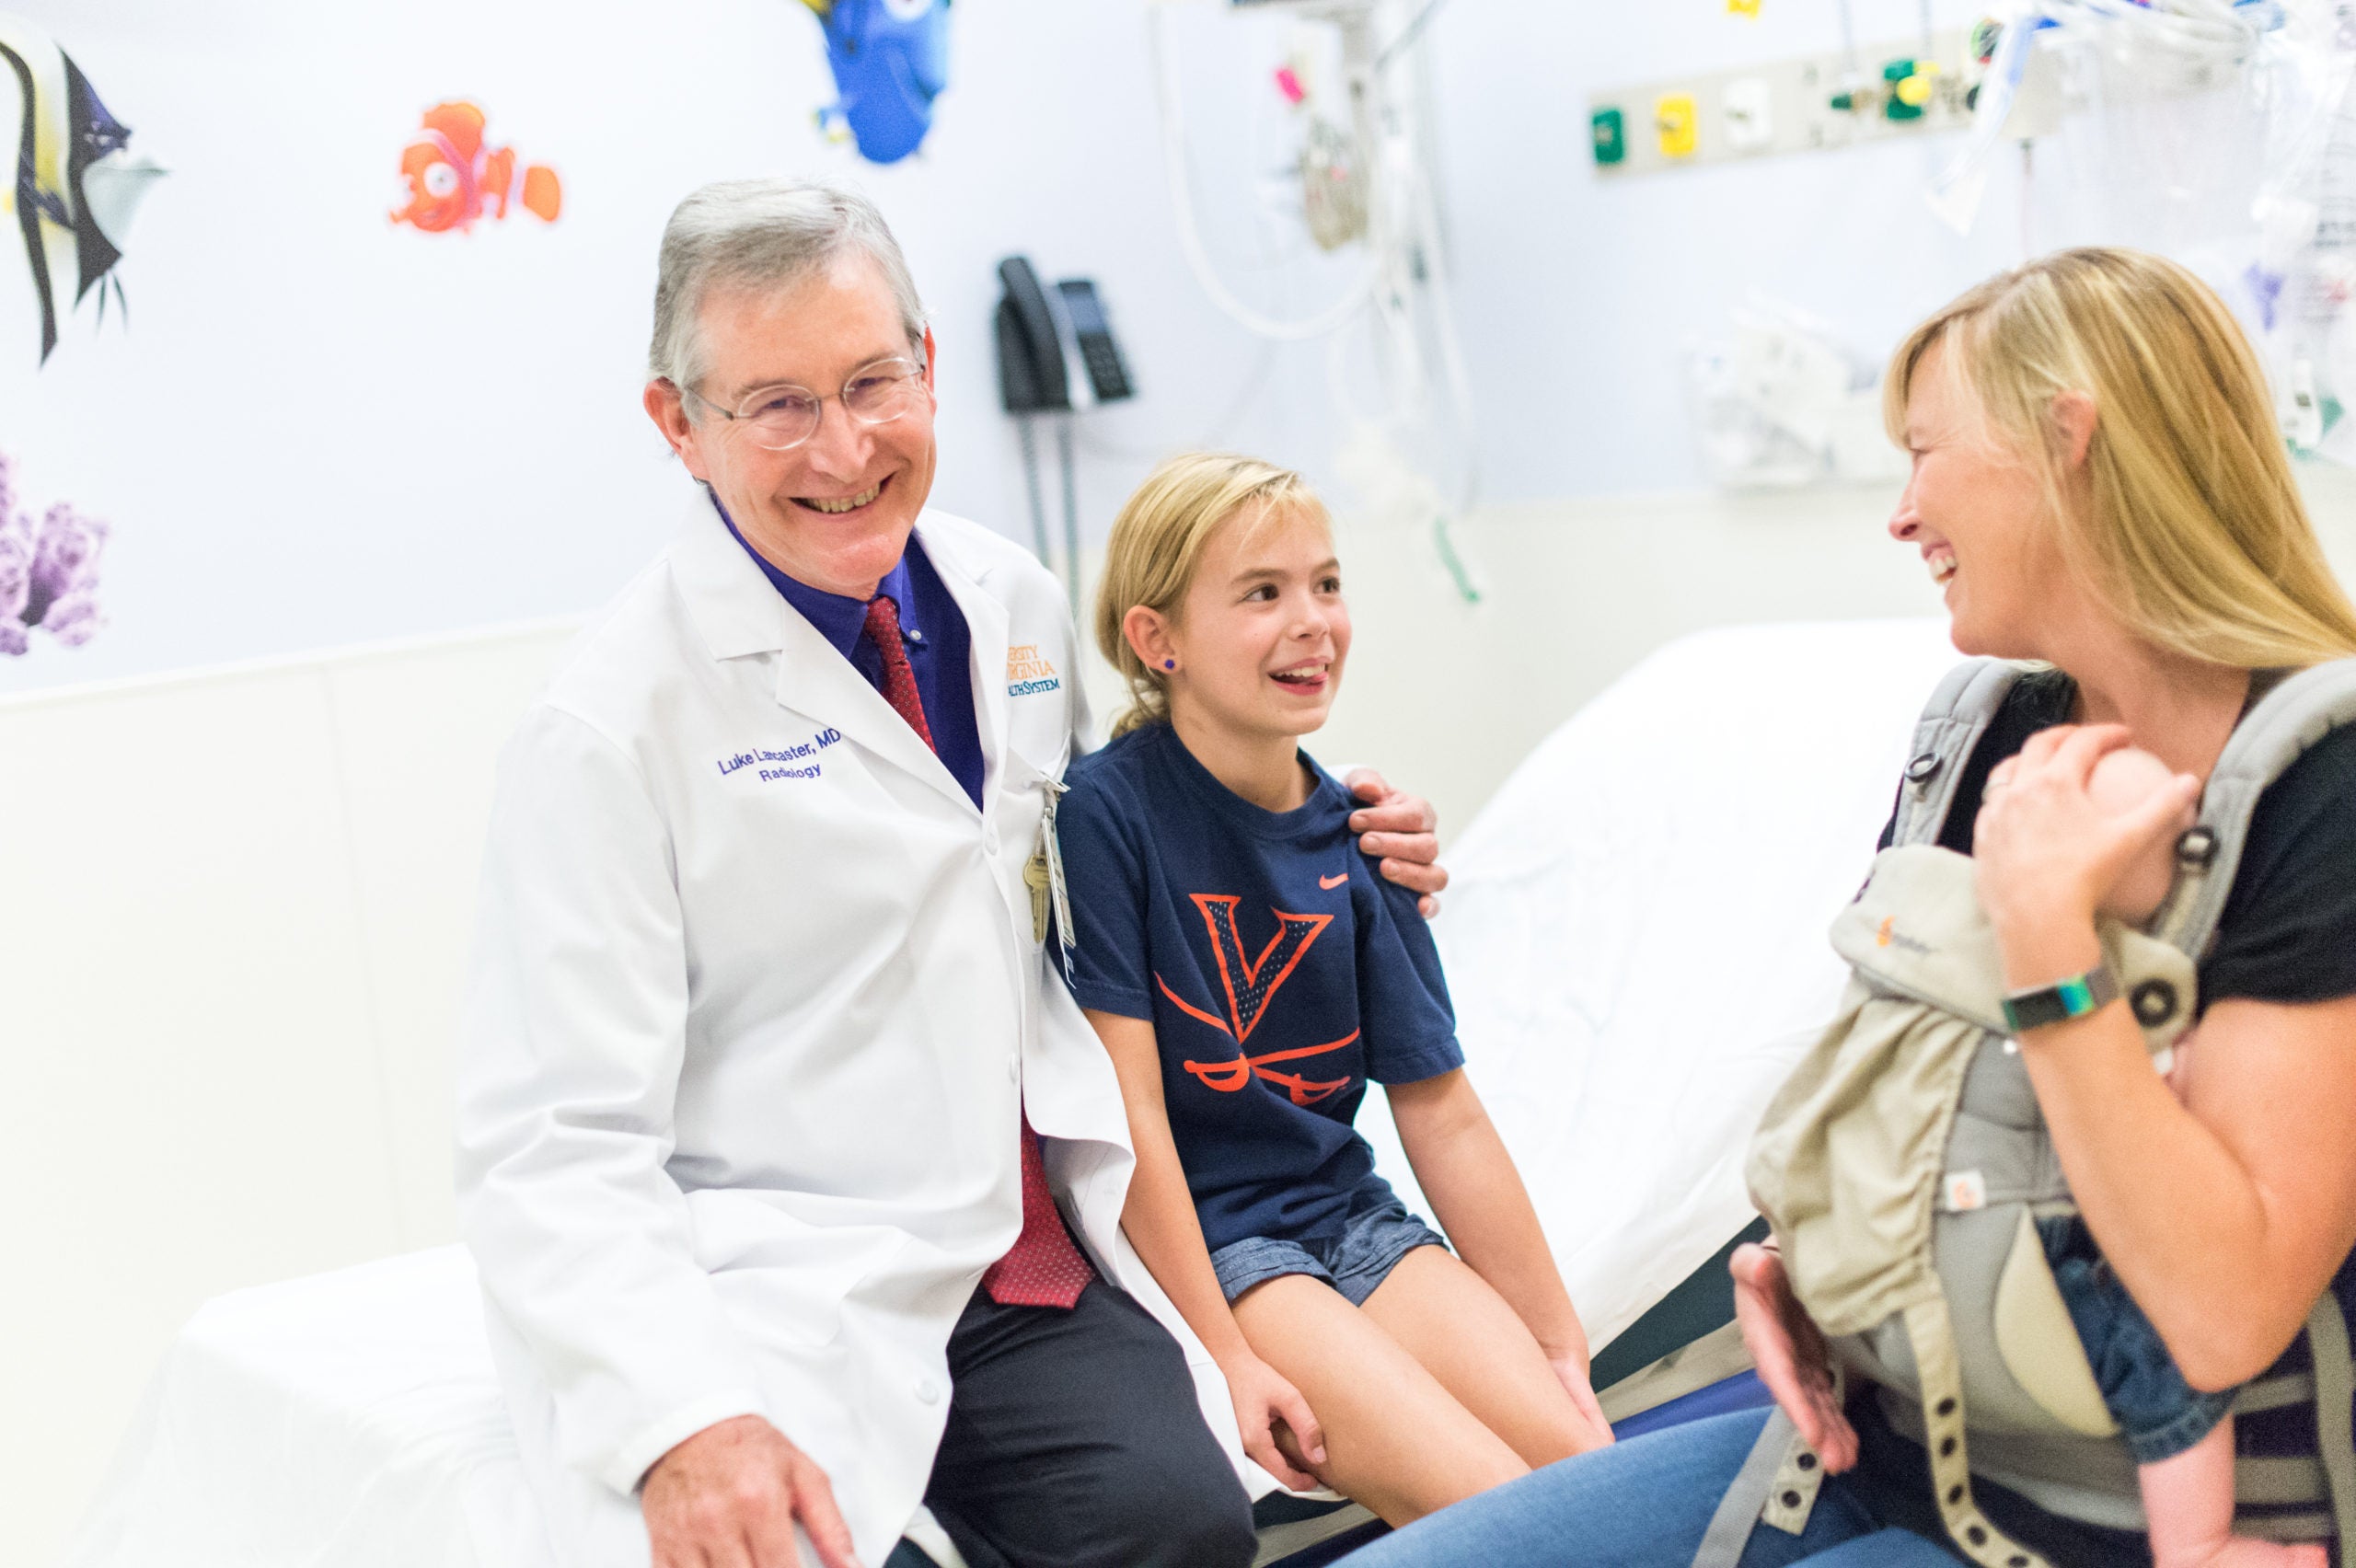 Dr. Luke Lancaster, Associate Professor of Pediatric Imaging, with a young patient